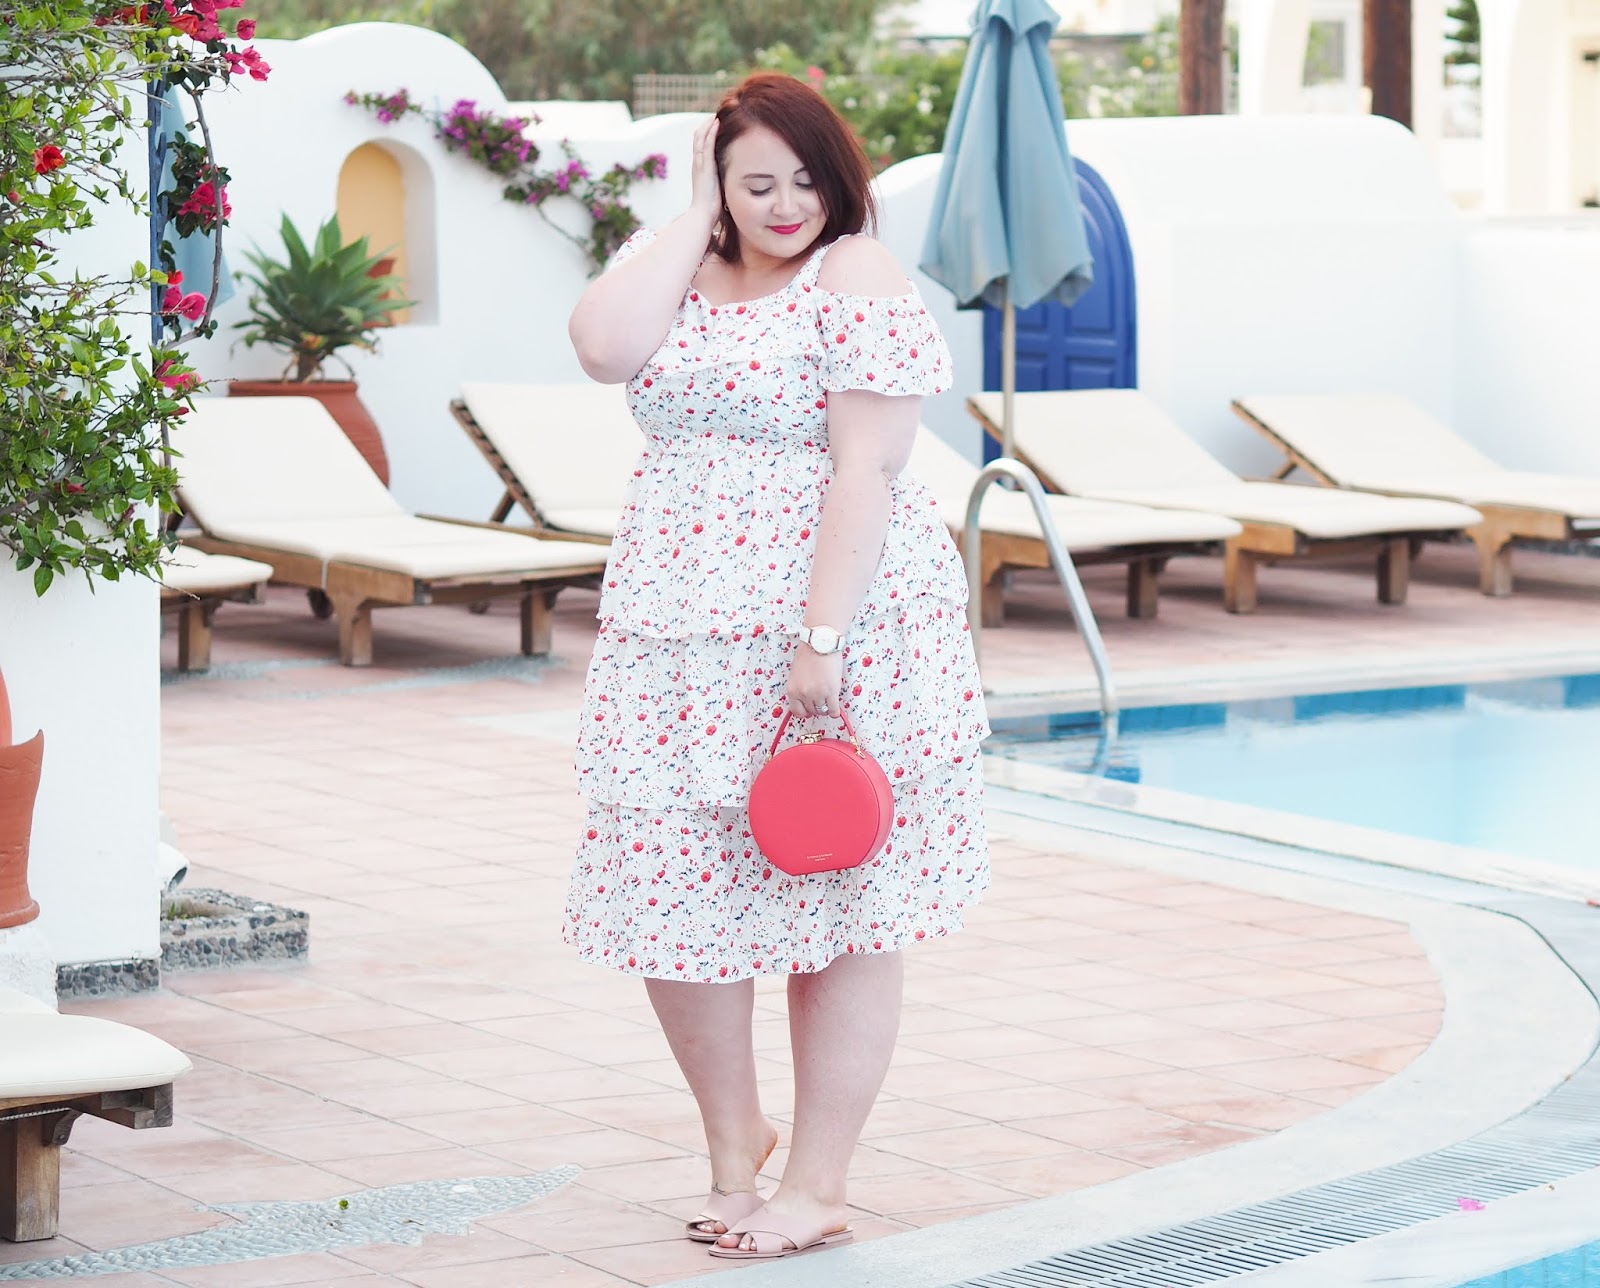 Style: A Tiered Summer Dress For Curvy Girls & My Newest Handbag Purchase